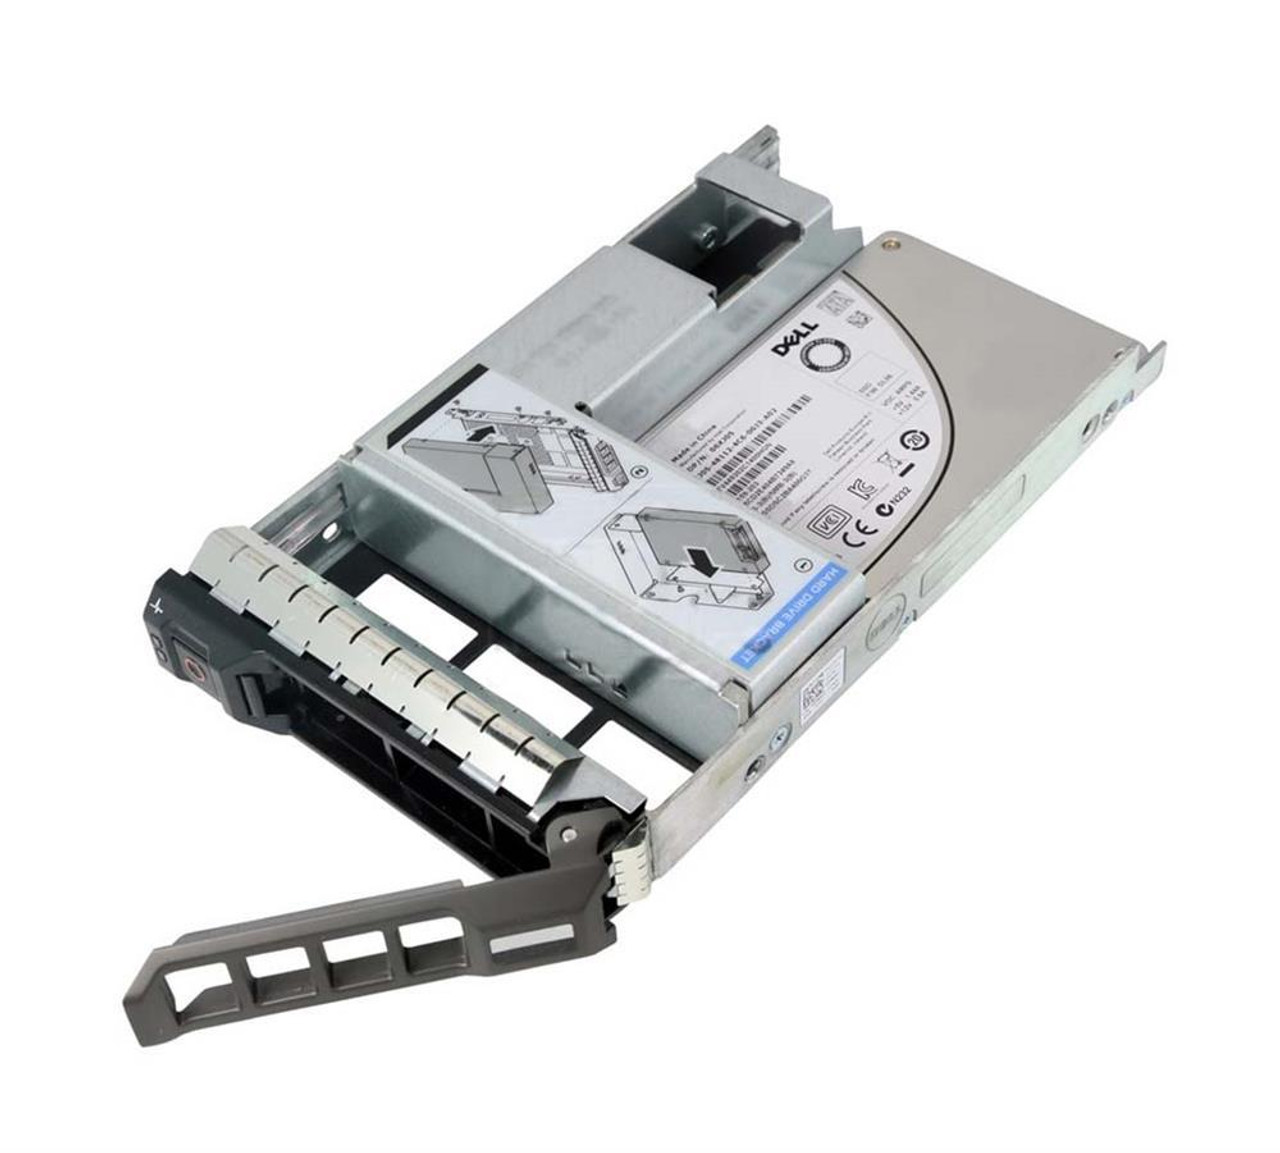 00RCT6 Dell 480GB MLC SATA 6Gbps Mixed Use 2.5-inch Internal Solid State Drive (SSD) in 3.5-inch Hybrid Carrier